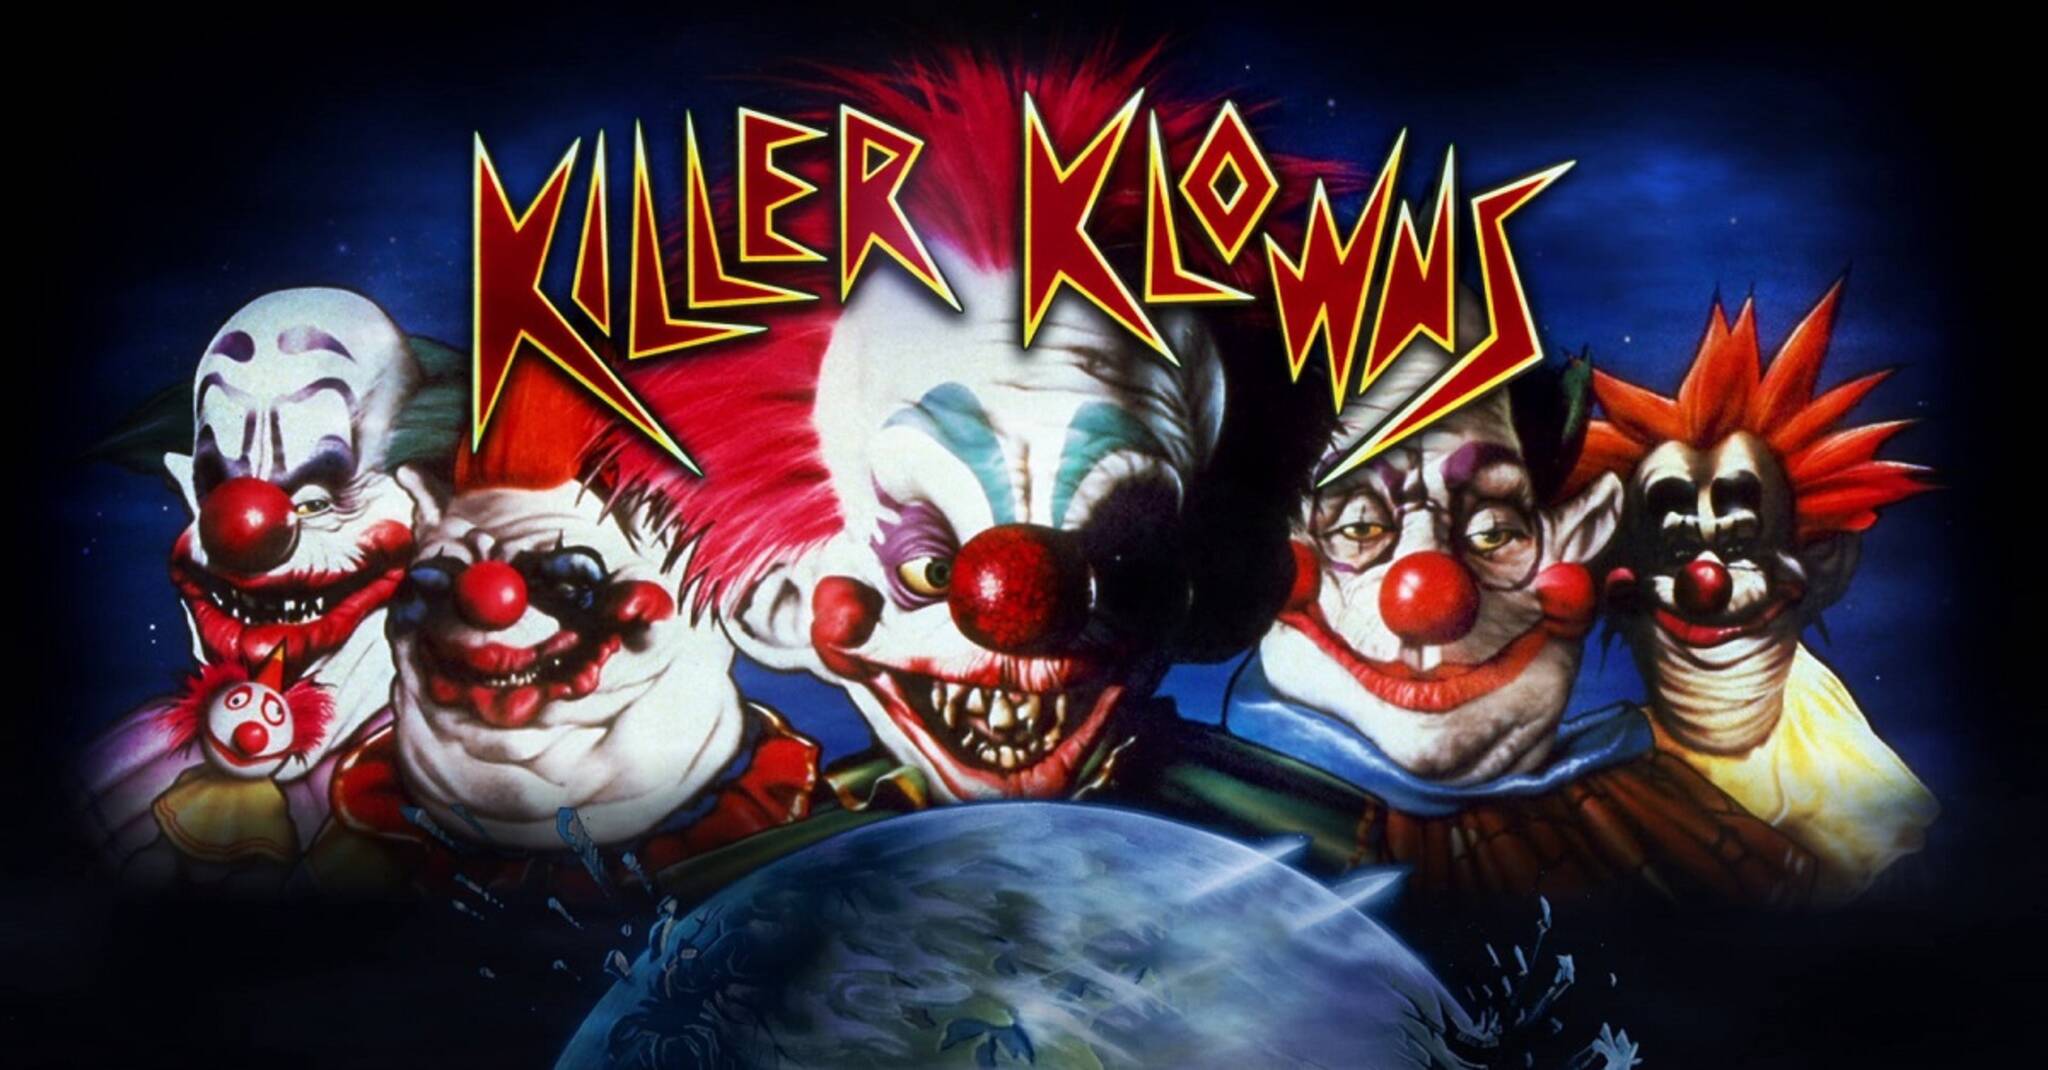 Killer klowns from outer. Клоуны-убийцы из космоса (1987). Клоуны-убийцы из космоса 1988. Killer Klowns from Outer Space 1988.